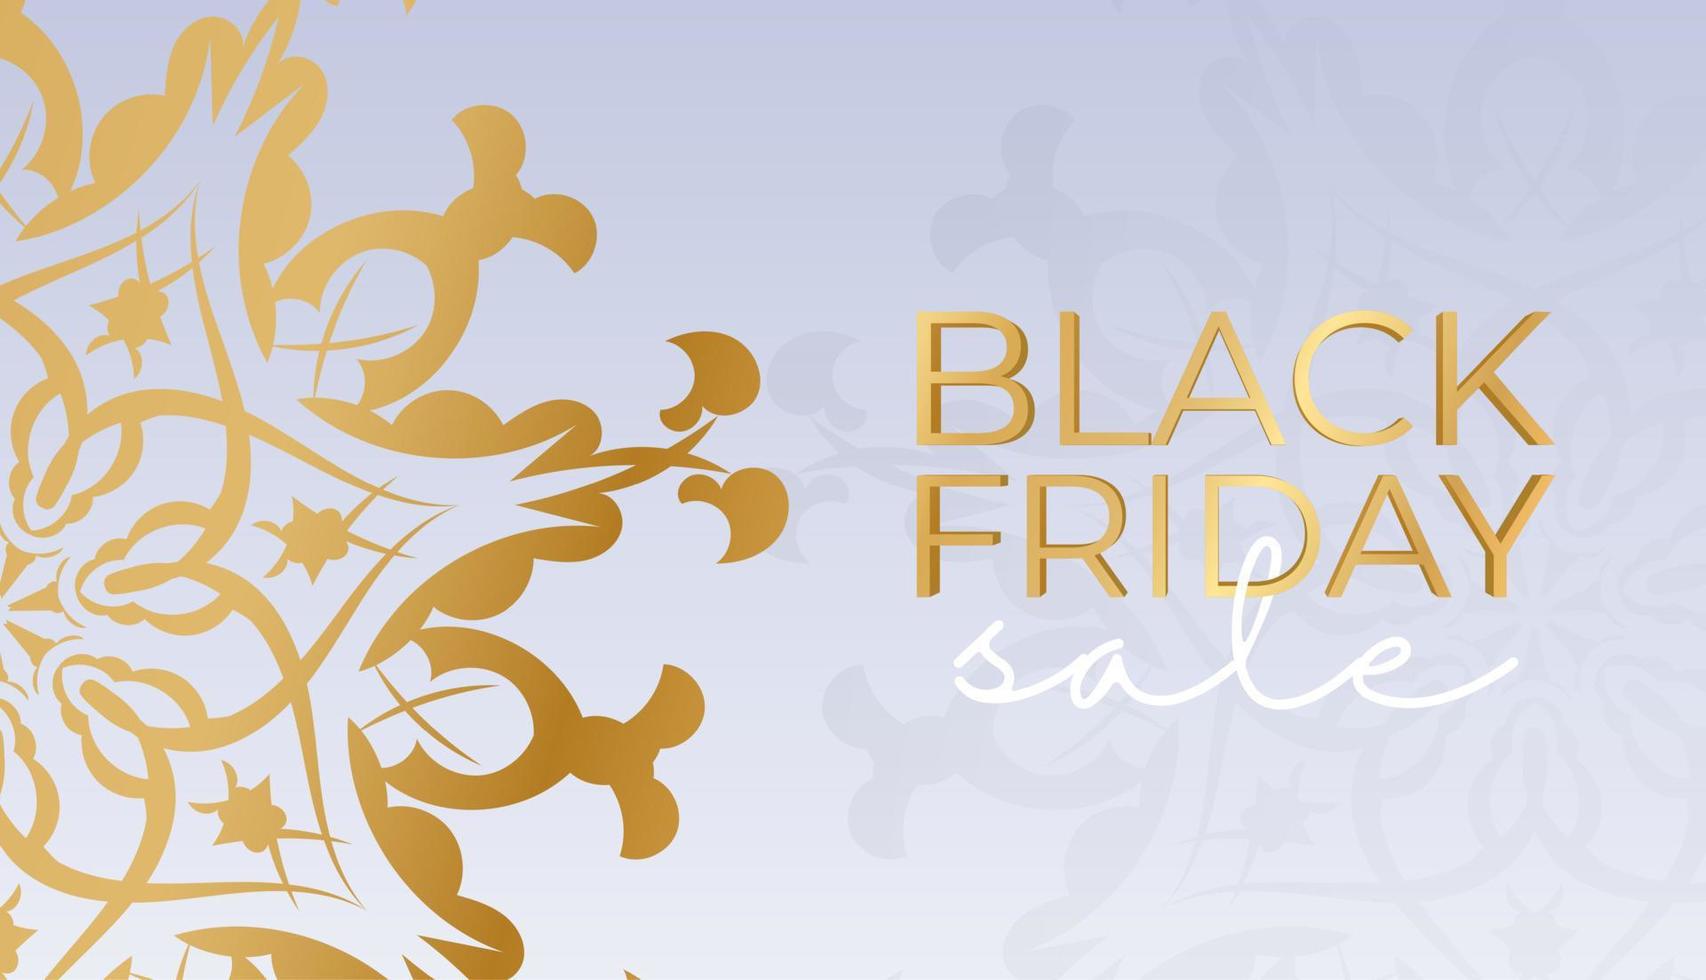 Celebration Advertising Black Friday in beige color with luxury pattern vector